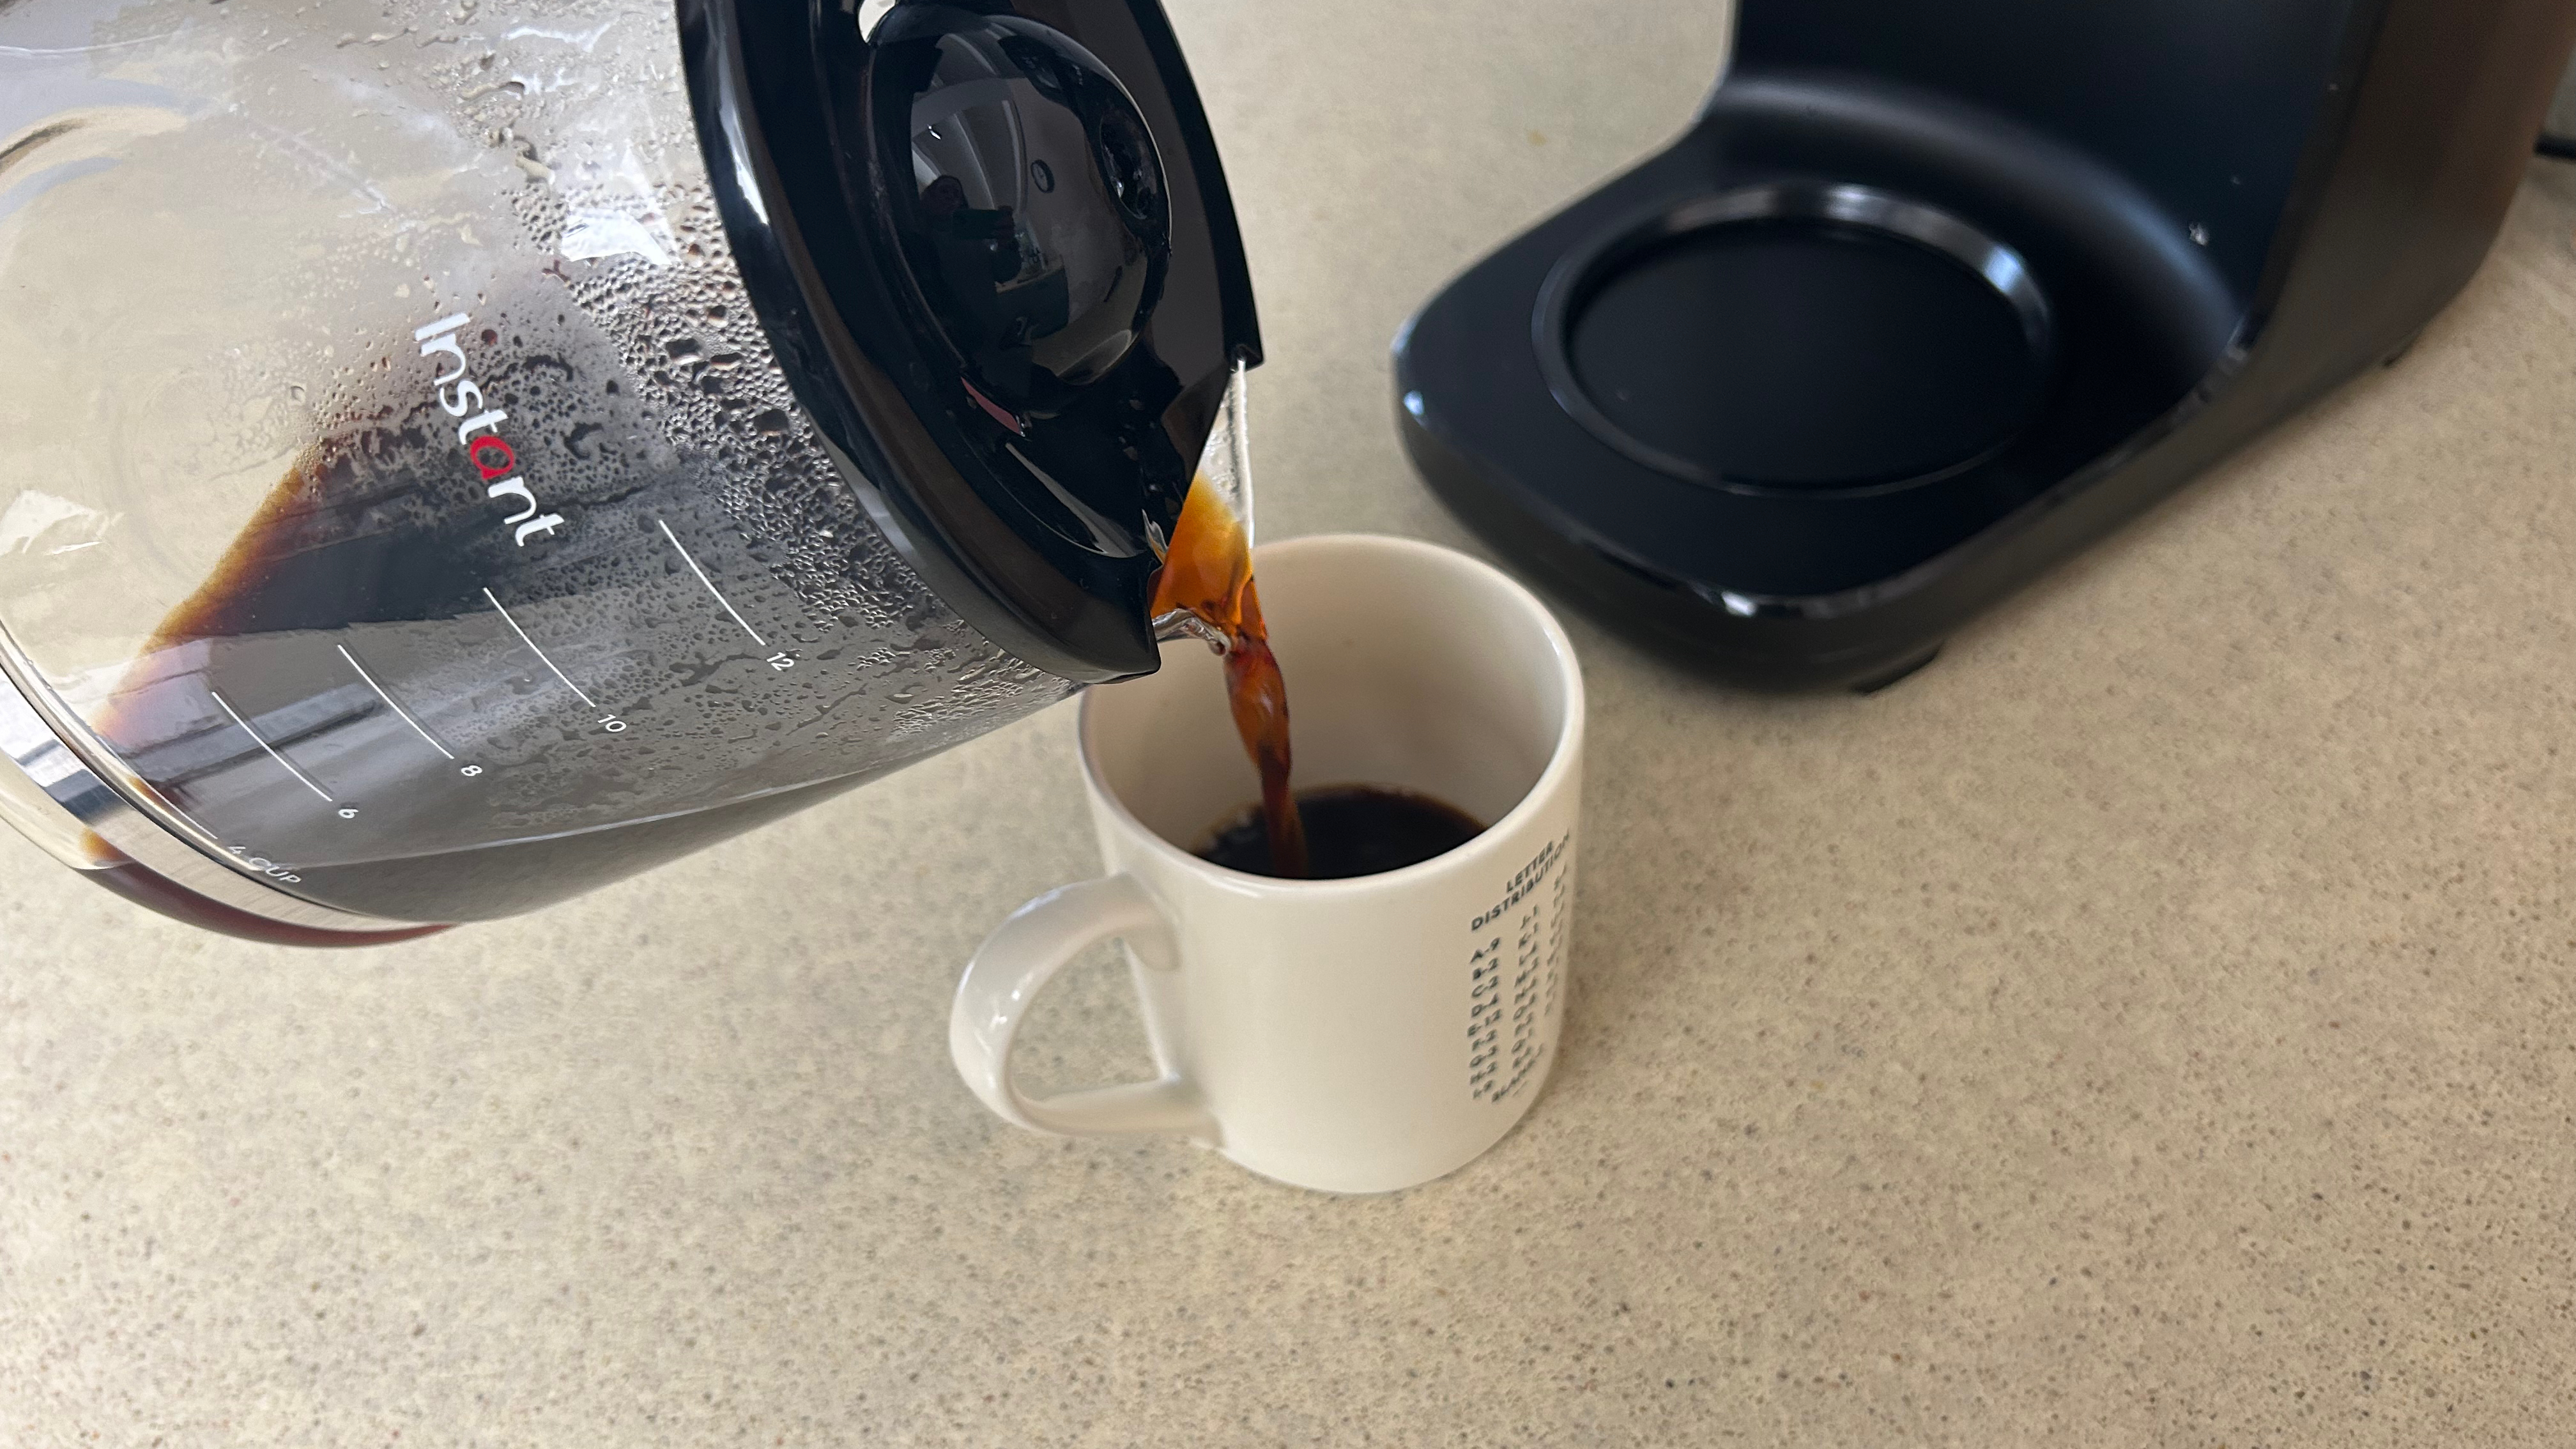 Pouring a cup of coffee from the Instant Infusion Brew jug